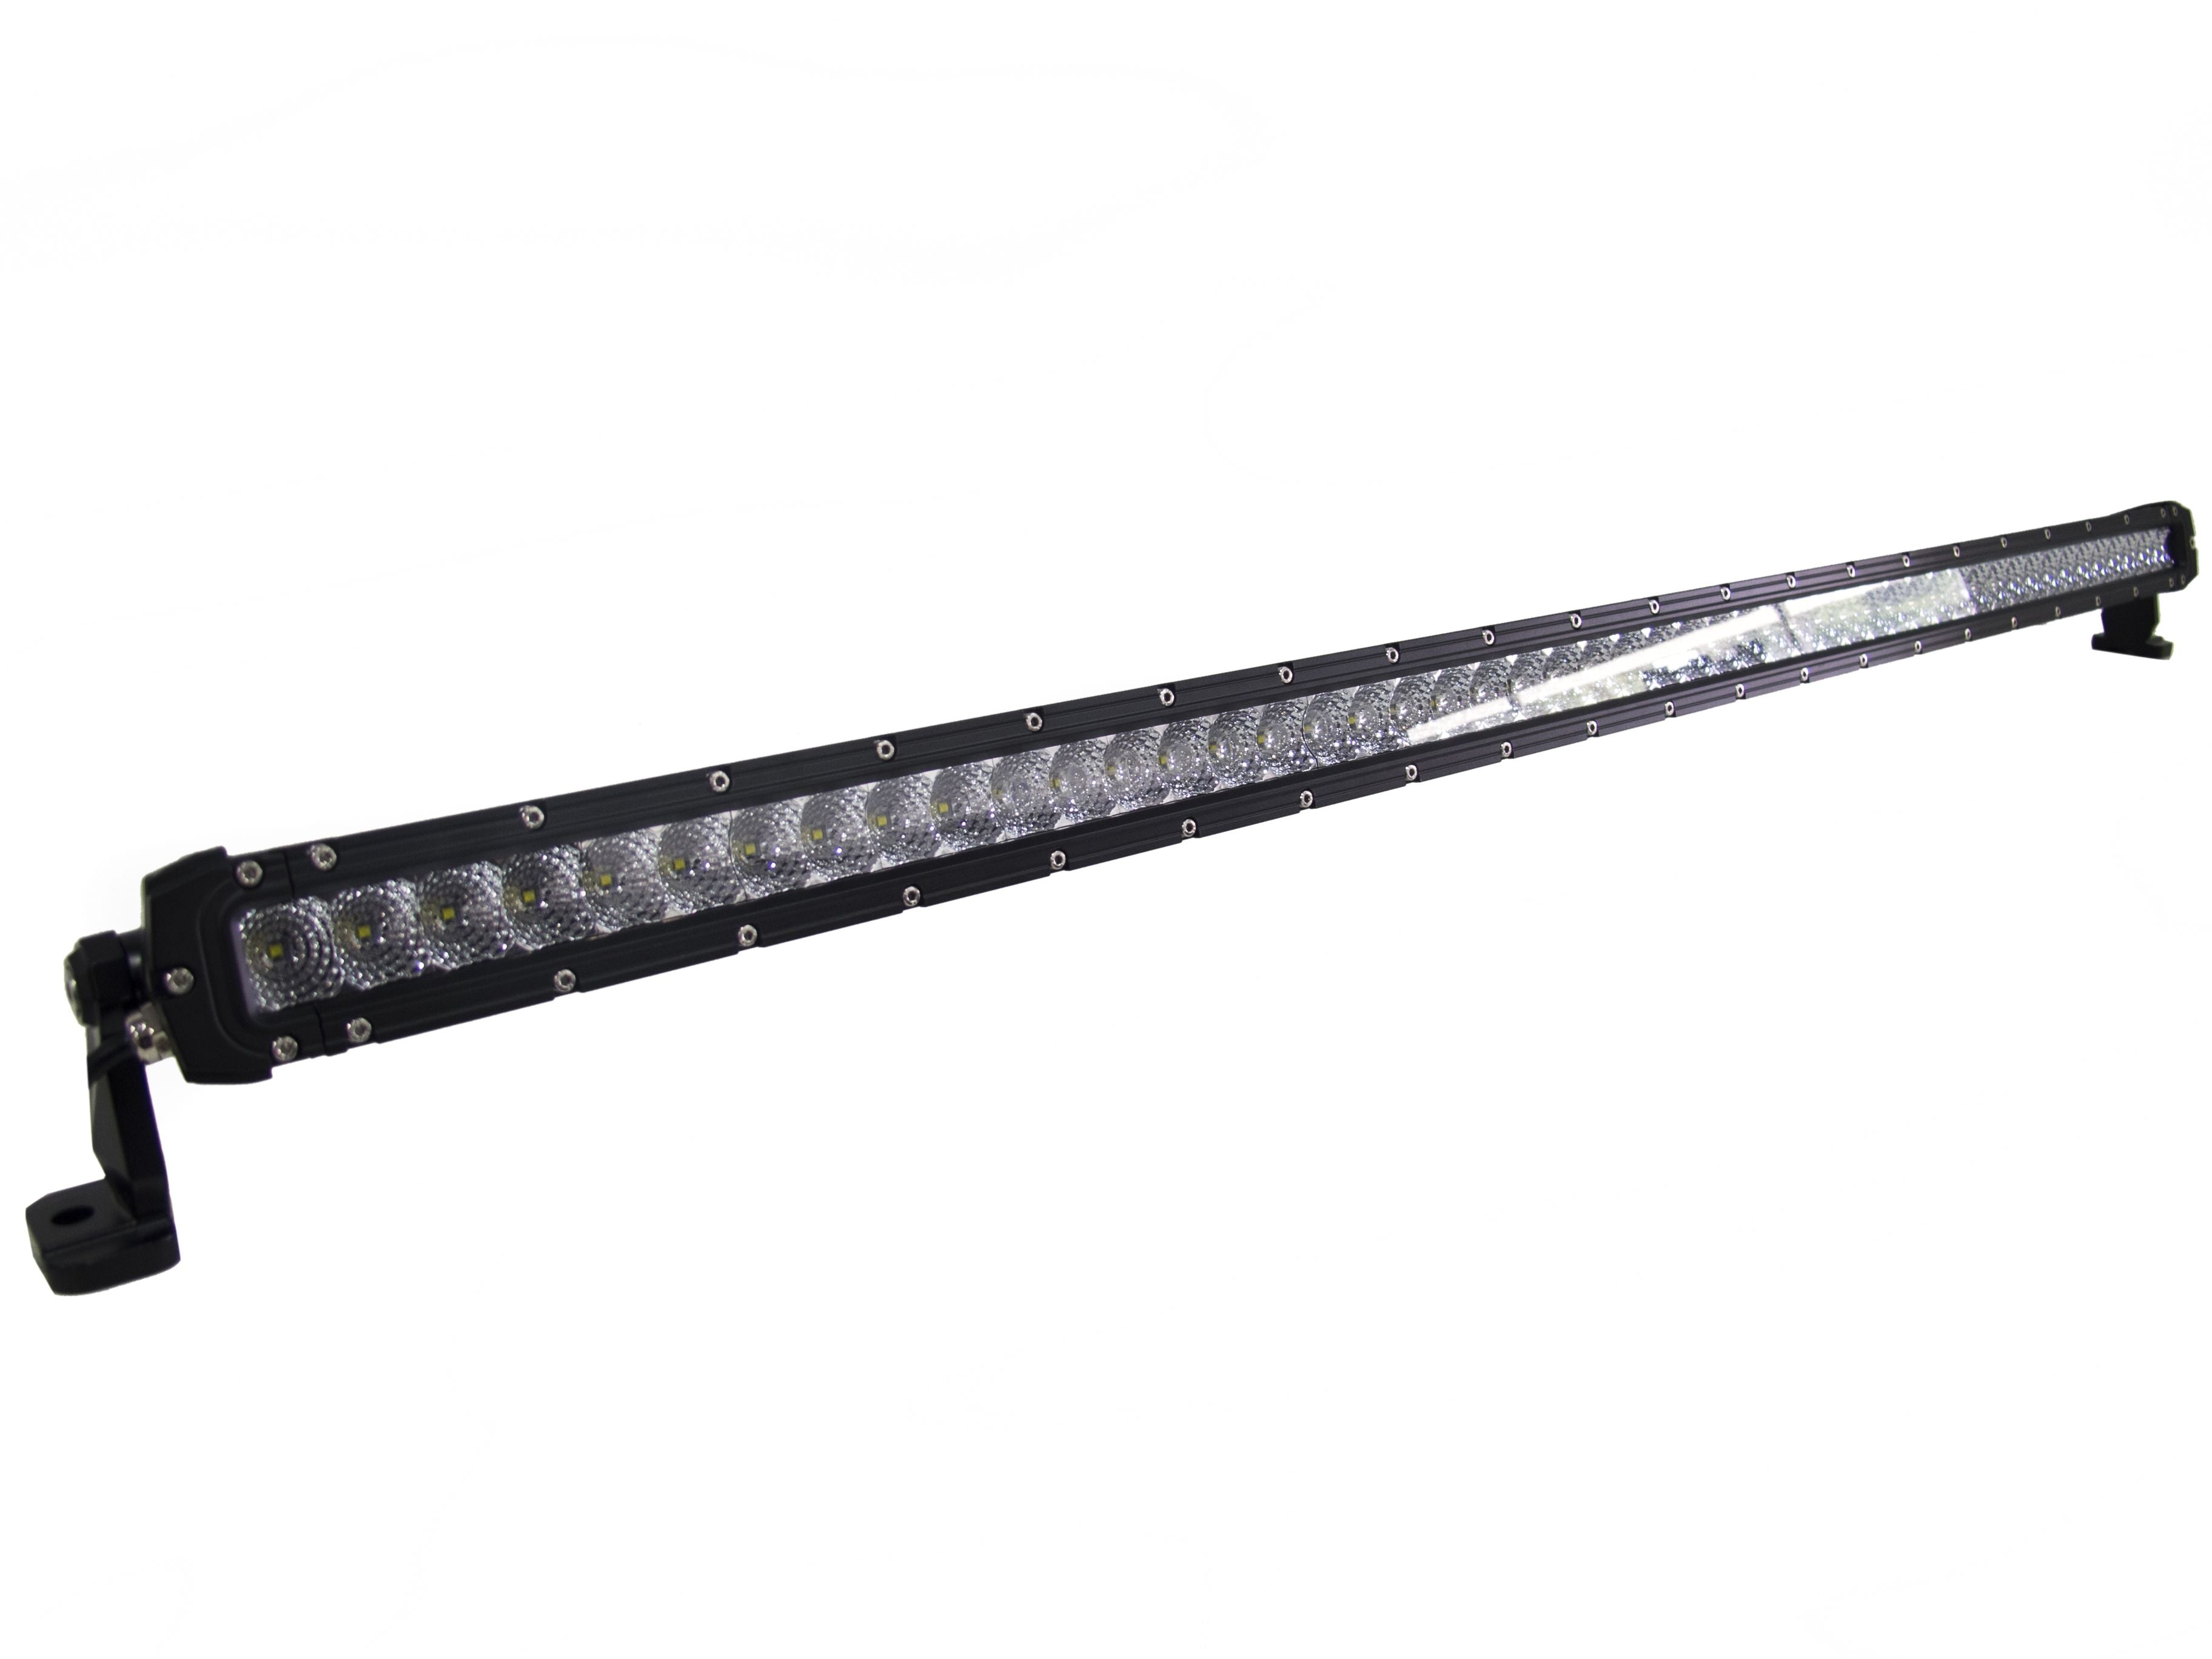 52in Single Row CREE COMBO Light Bar 250W/21,400LM - Professional Grade STEALTH Series RS-HD-SR50